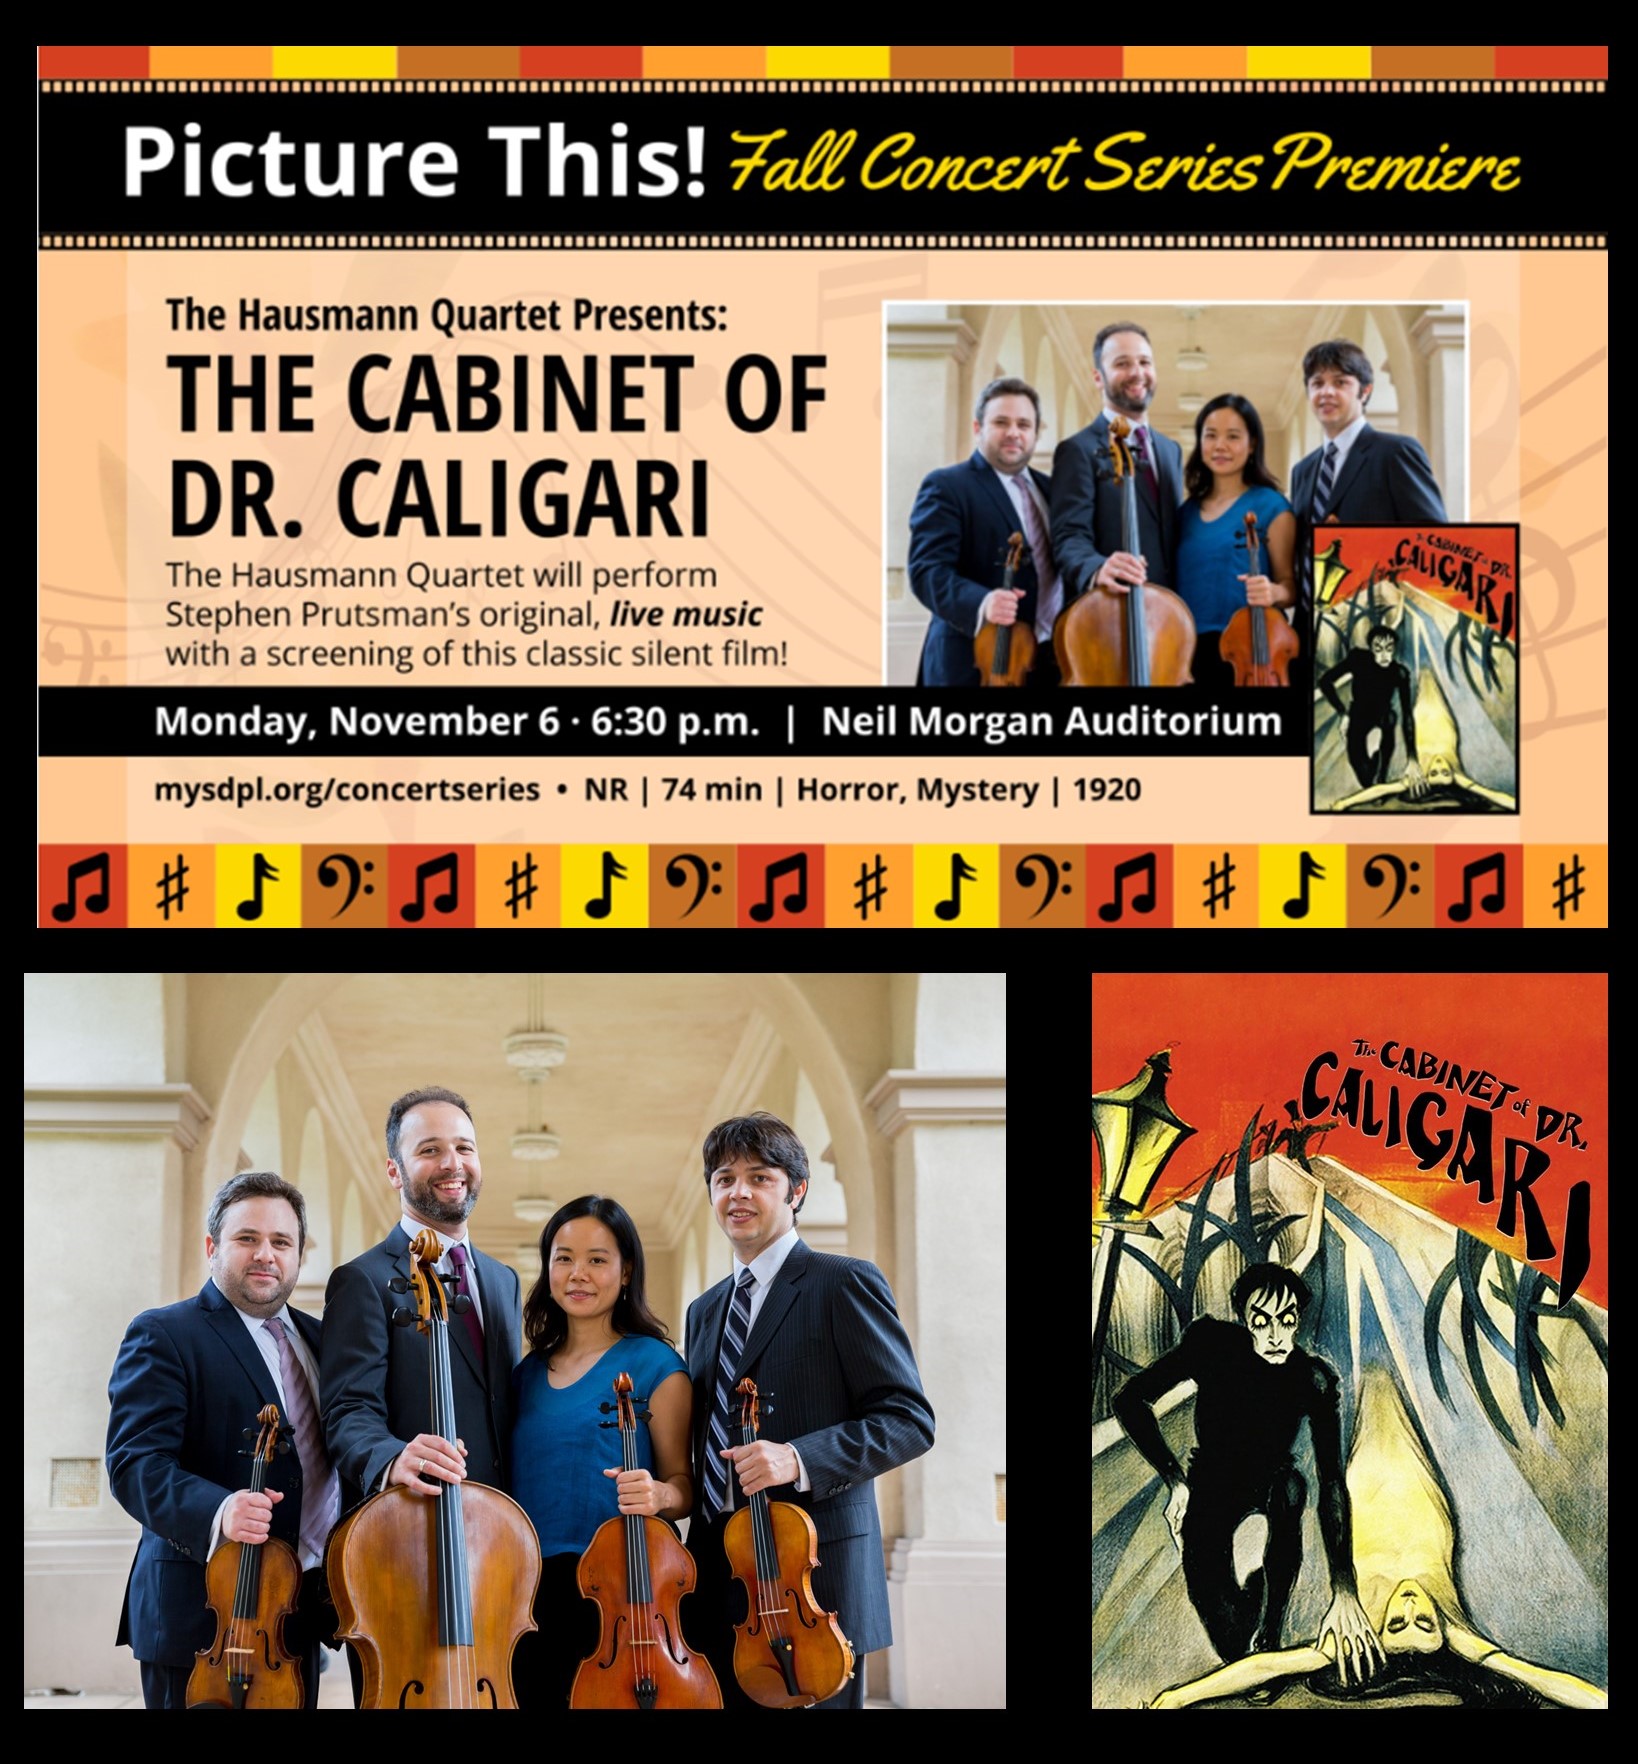 images of the concert poster, Hausmann Quartet press photo, and film poster